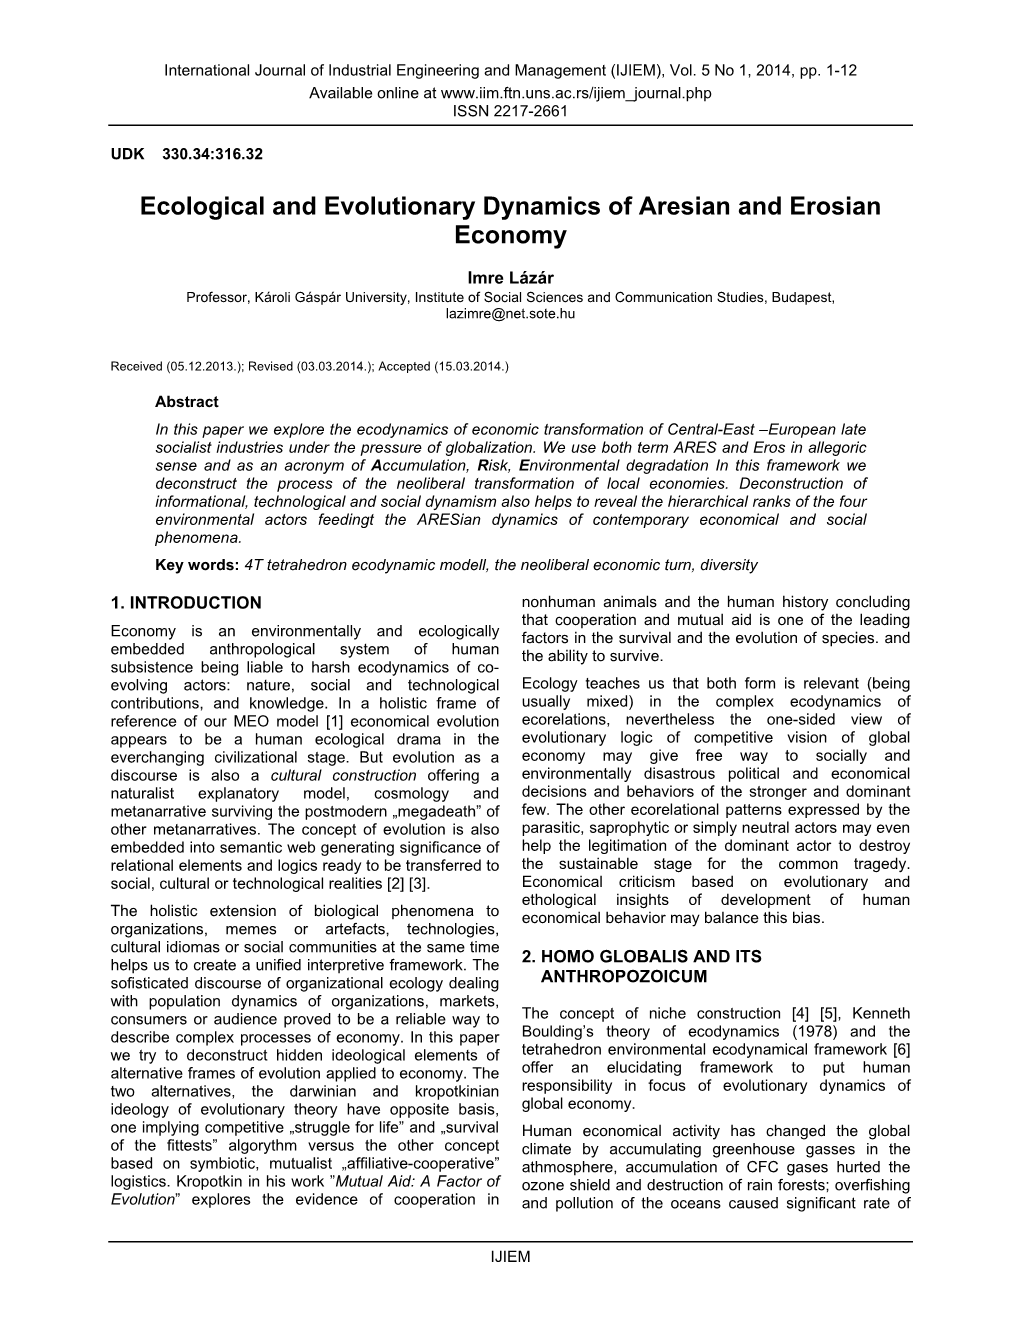 Ecological and Evolutionary Dynamics of Aresian and Erosian Economy